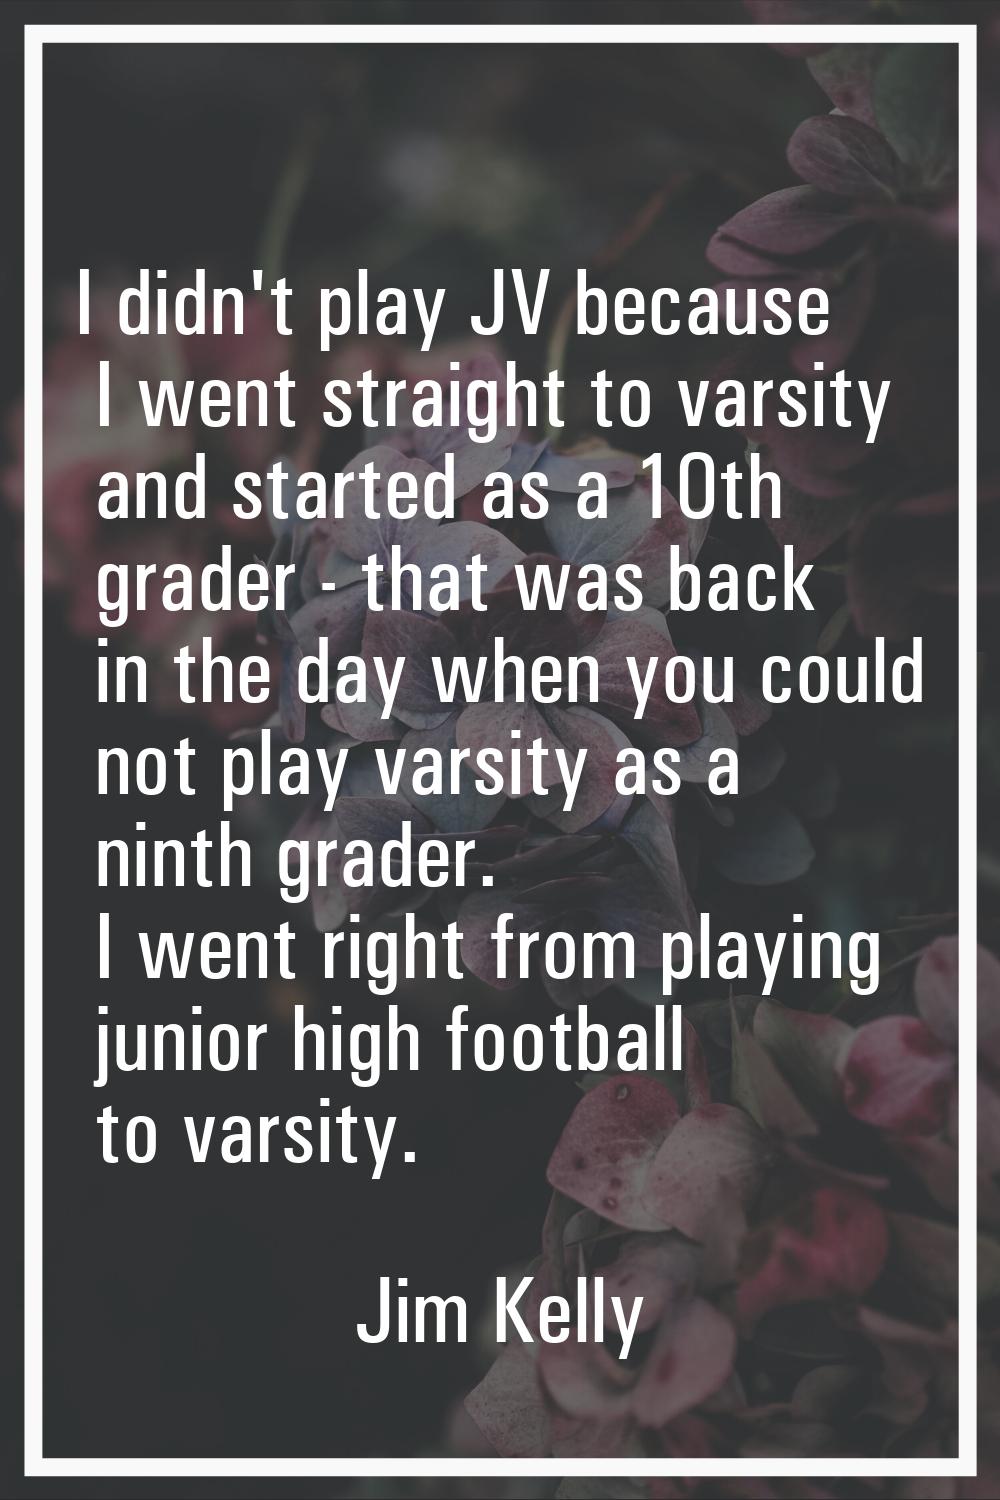 I didn't play JV because I went straight to varsity and started as a 10th grader - that was back in